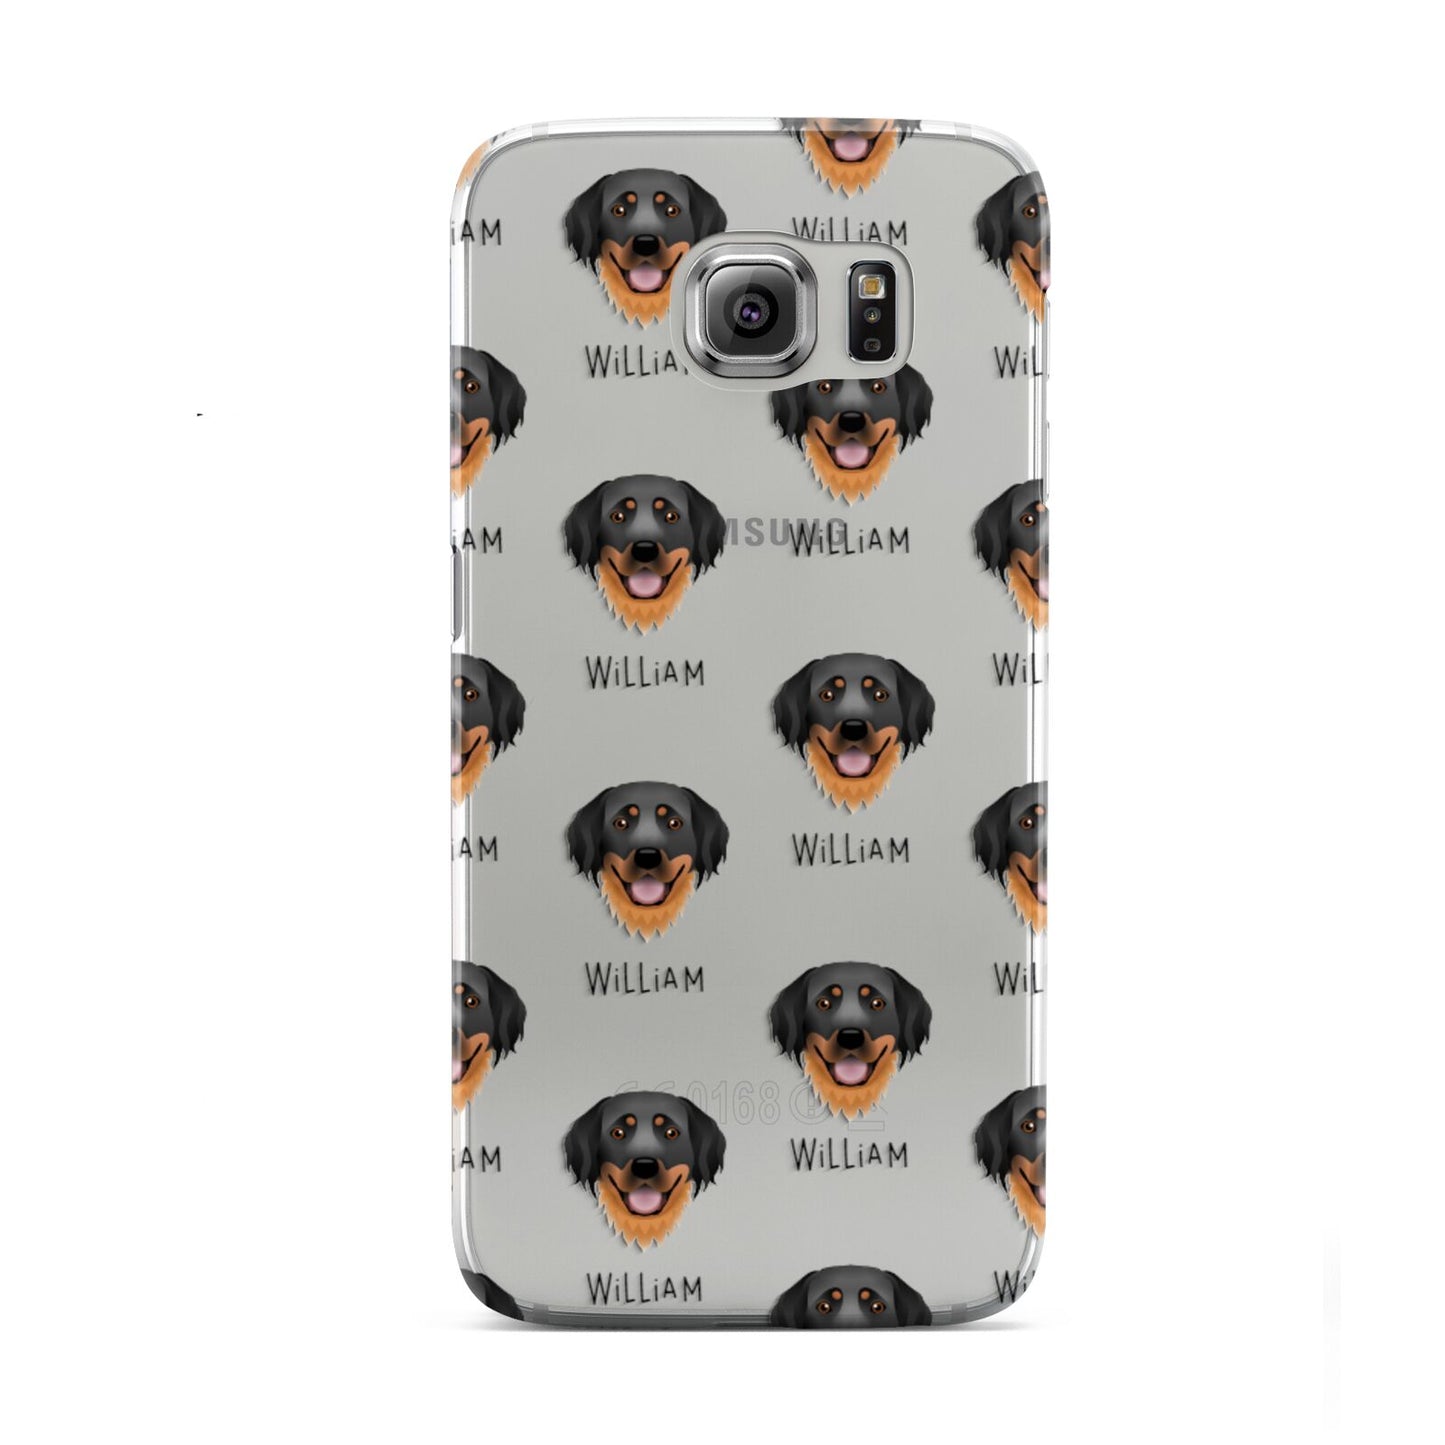 Hovawart Icon with Name Samsung Galaxy S6 Case